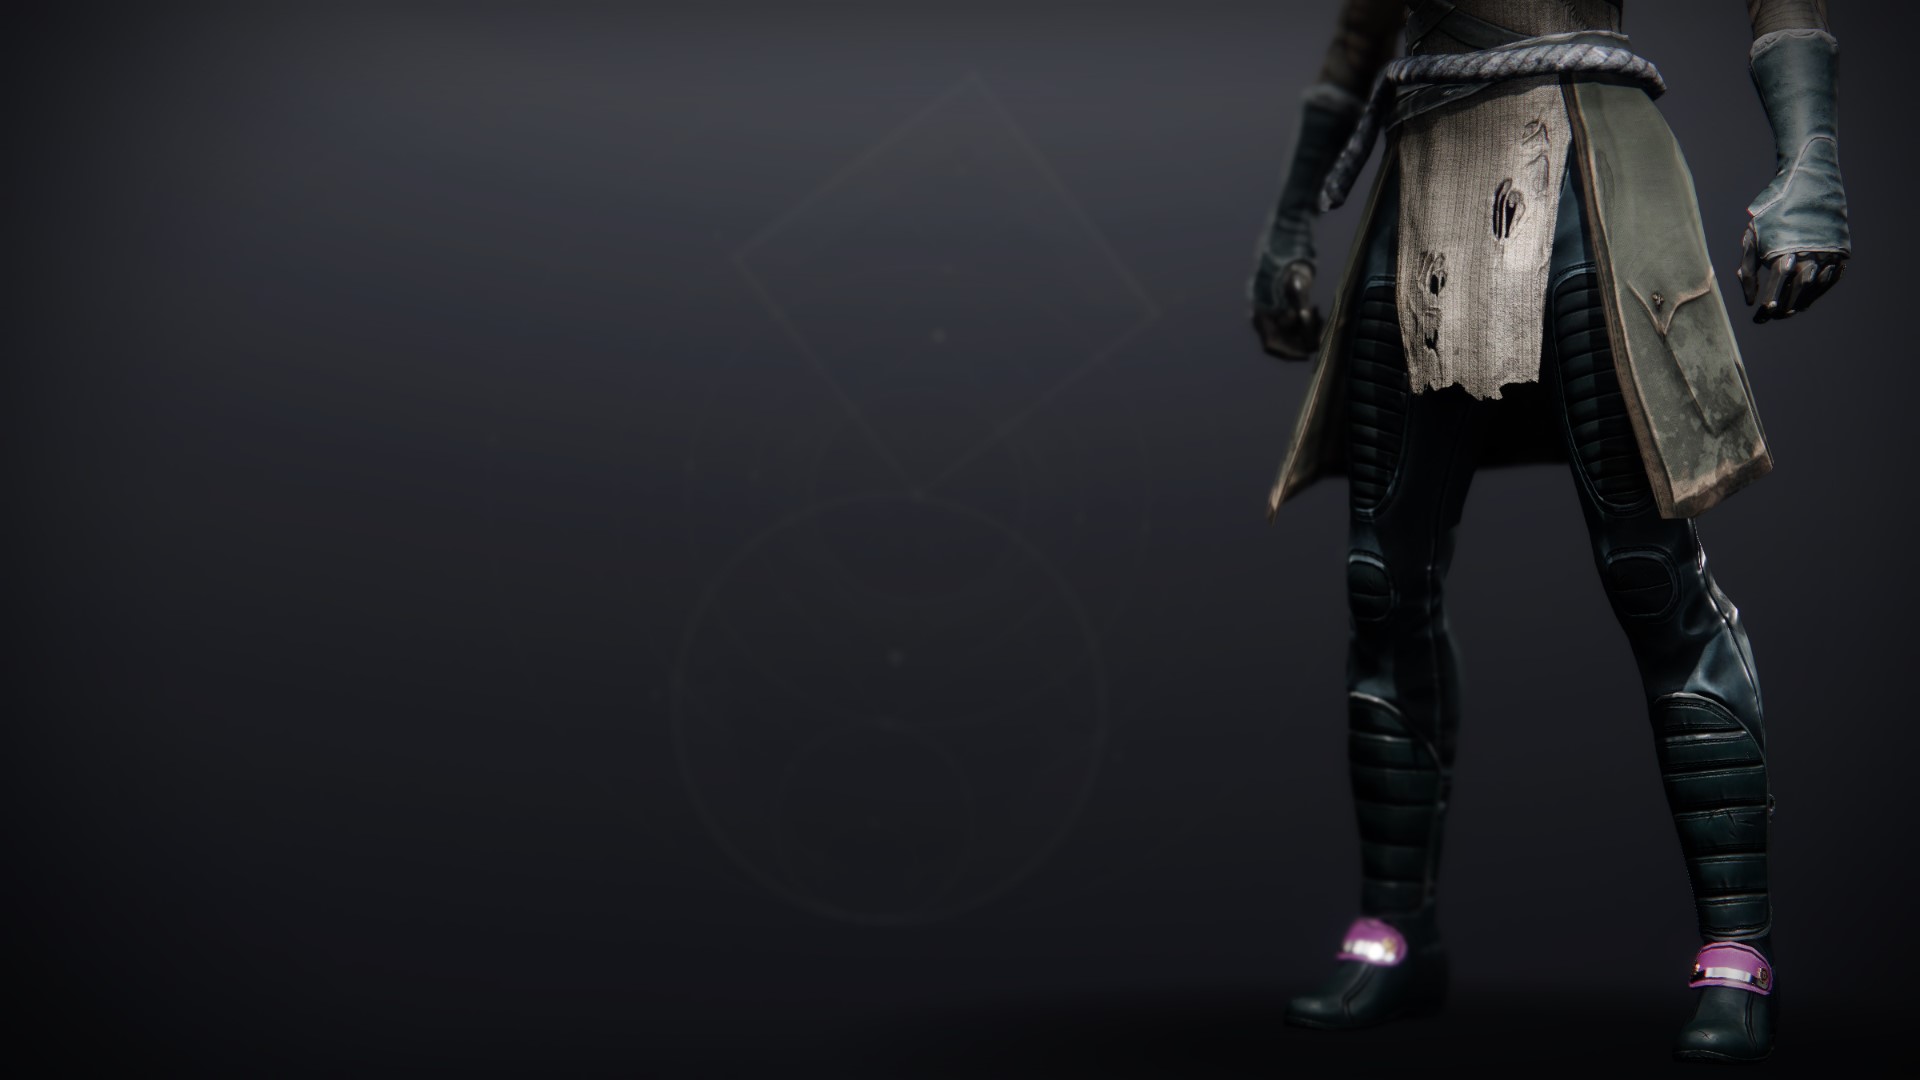 An in-game render of the Pathfinder's Pants.